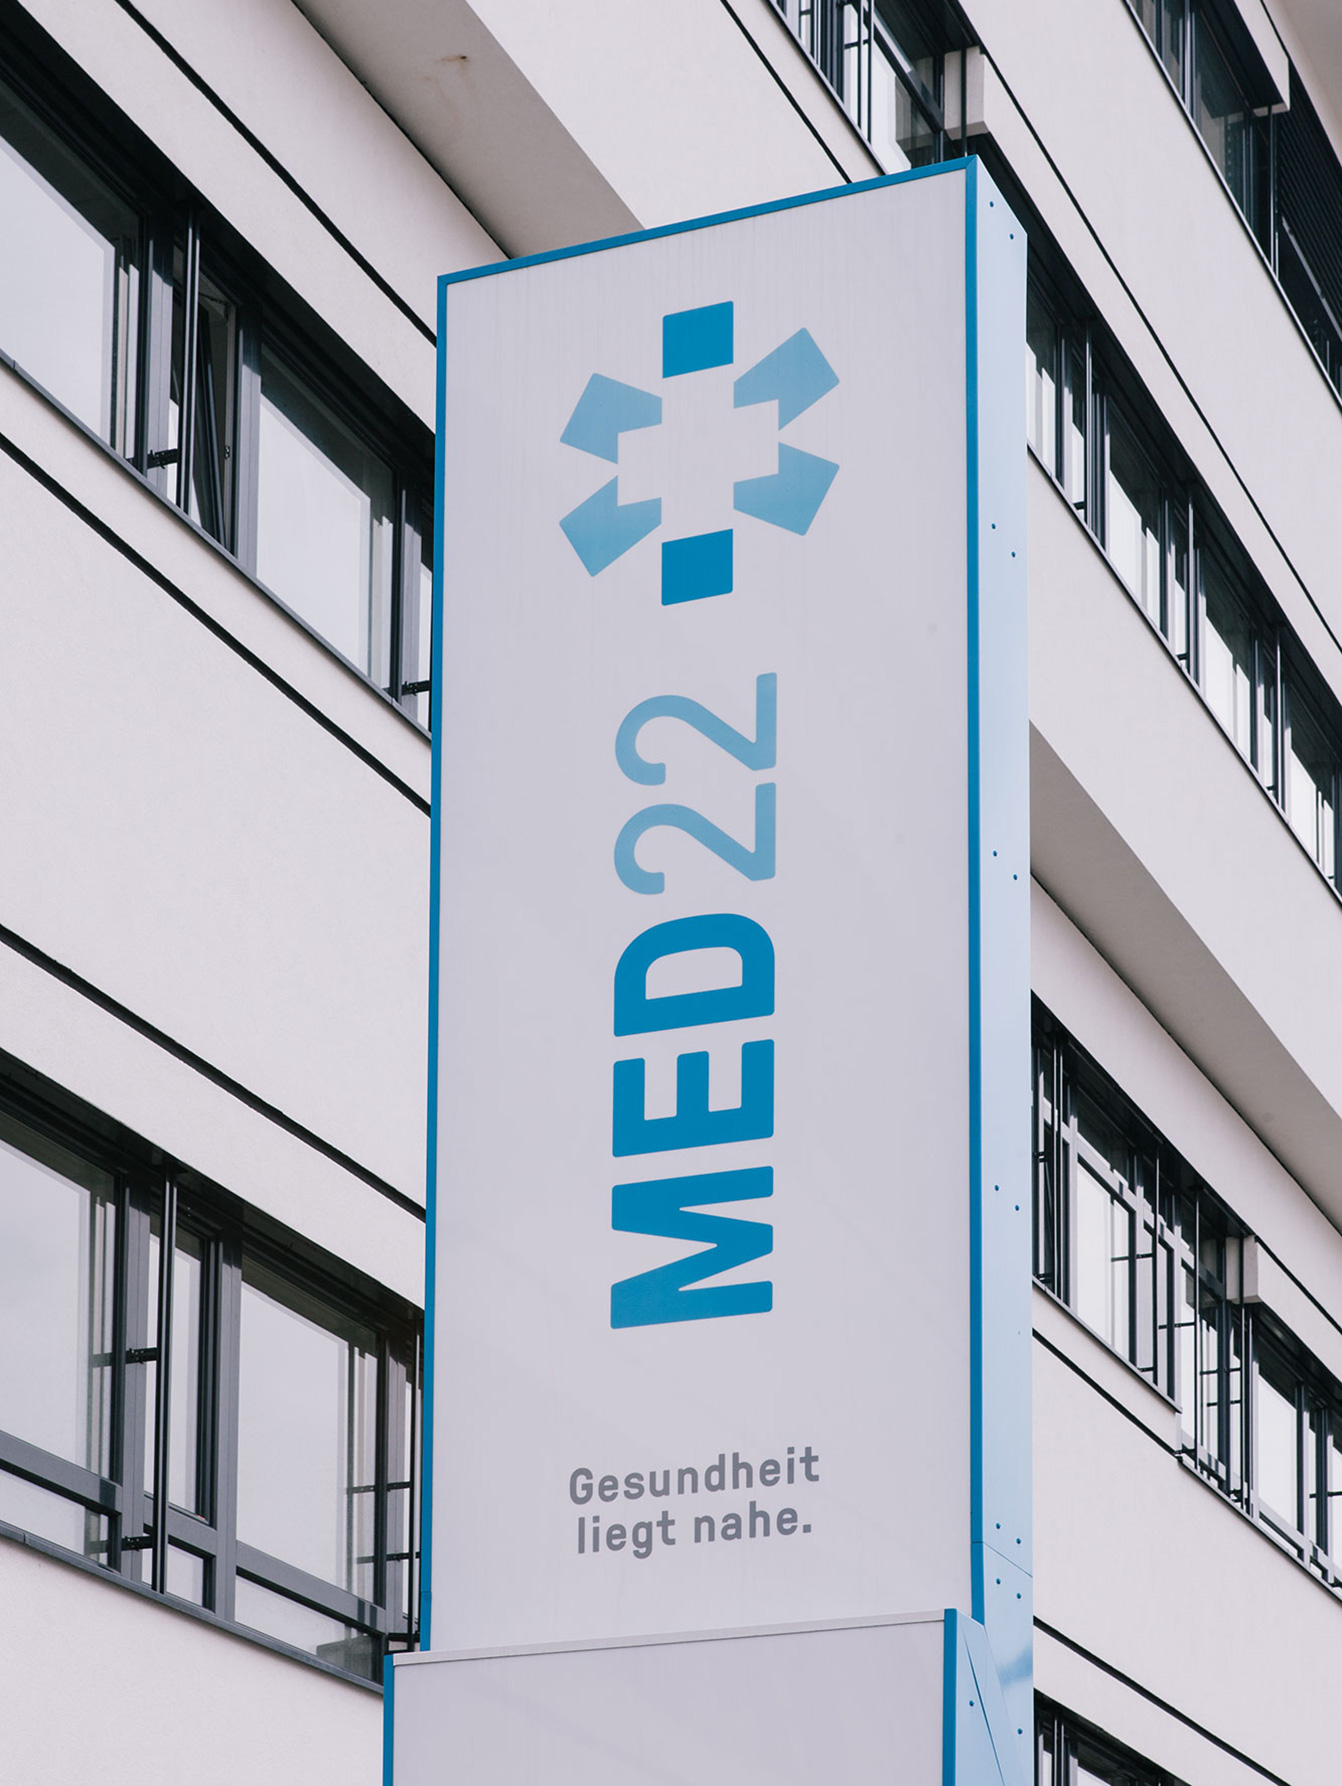 Stele in front of the health center, white rectangle with blue borders and the corporate with lettering and logo in blue